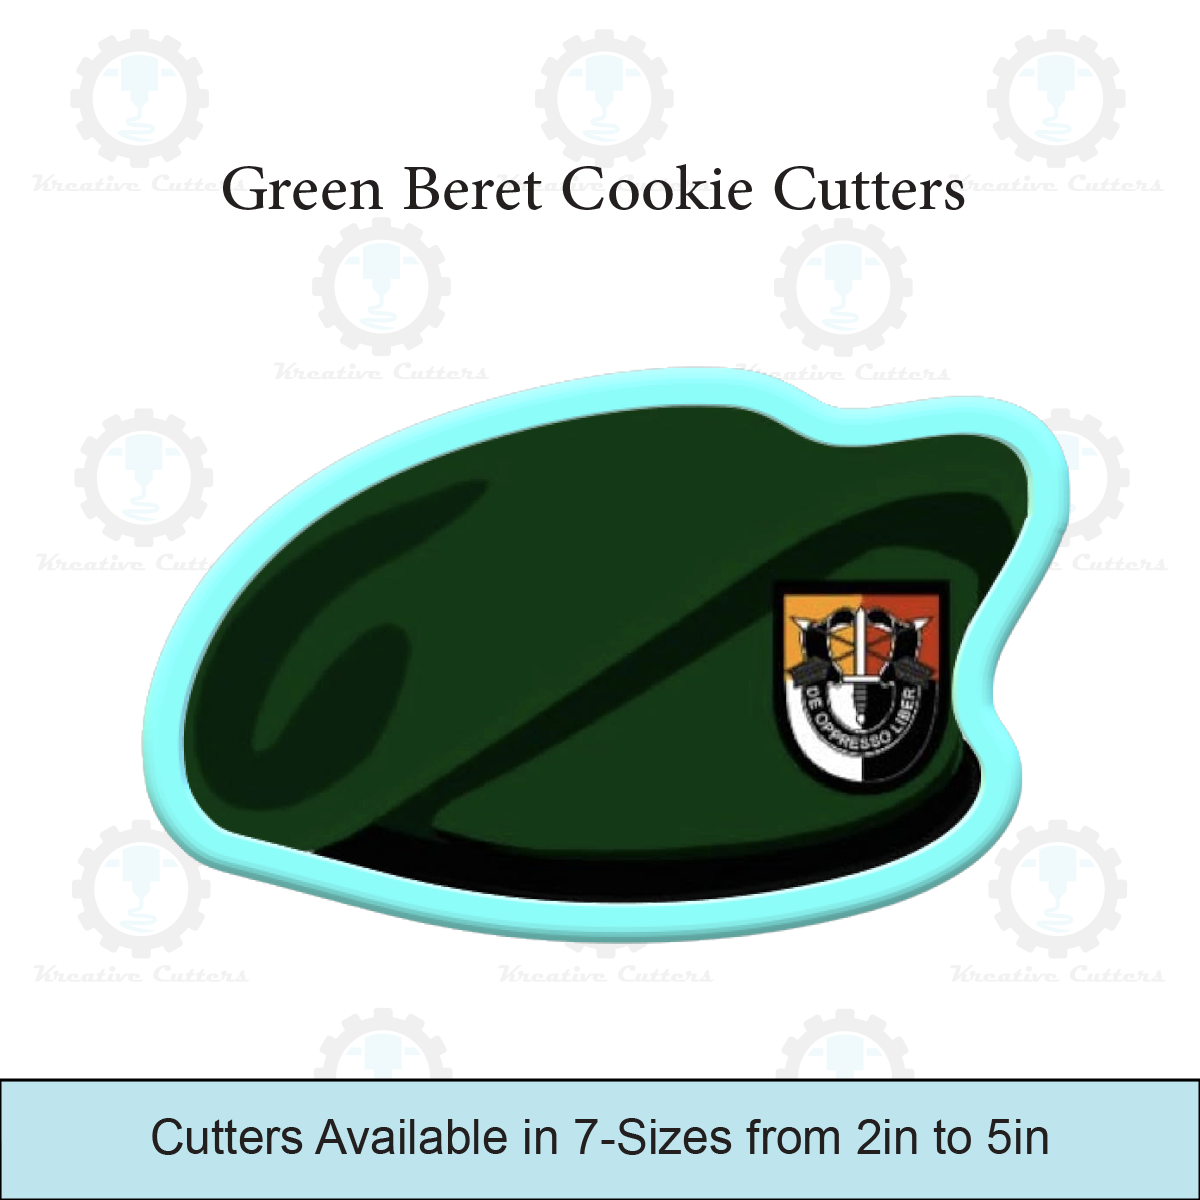 Green Beret Cookie Cutters